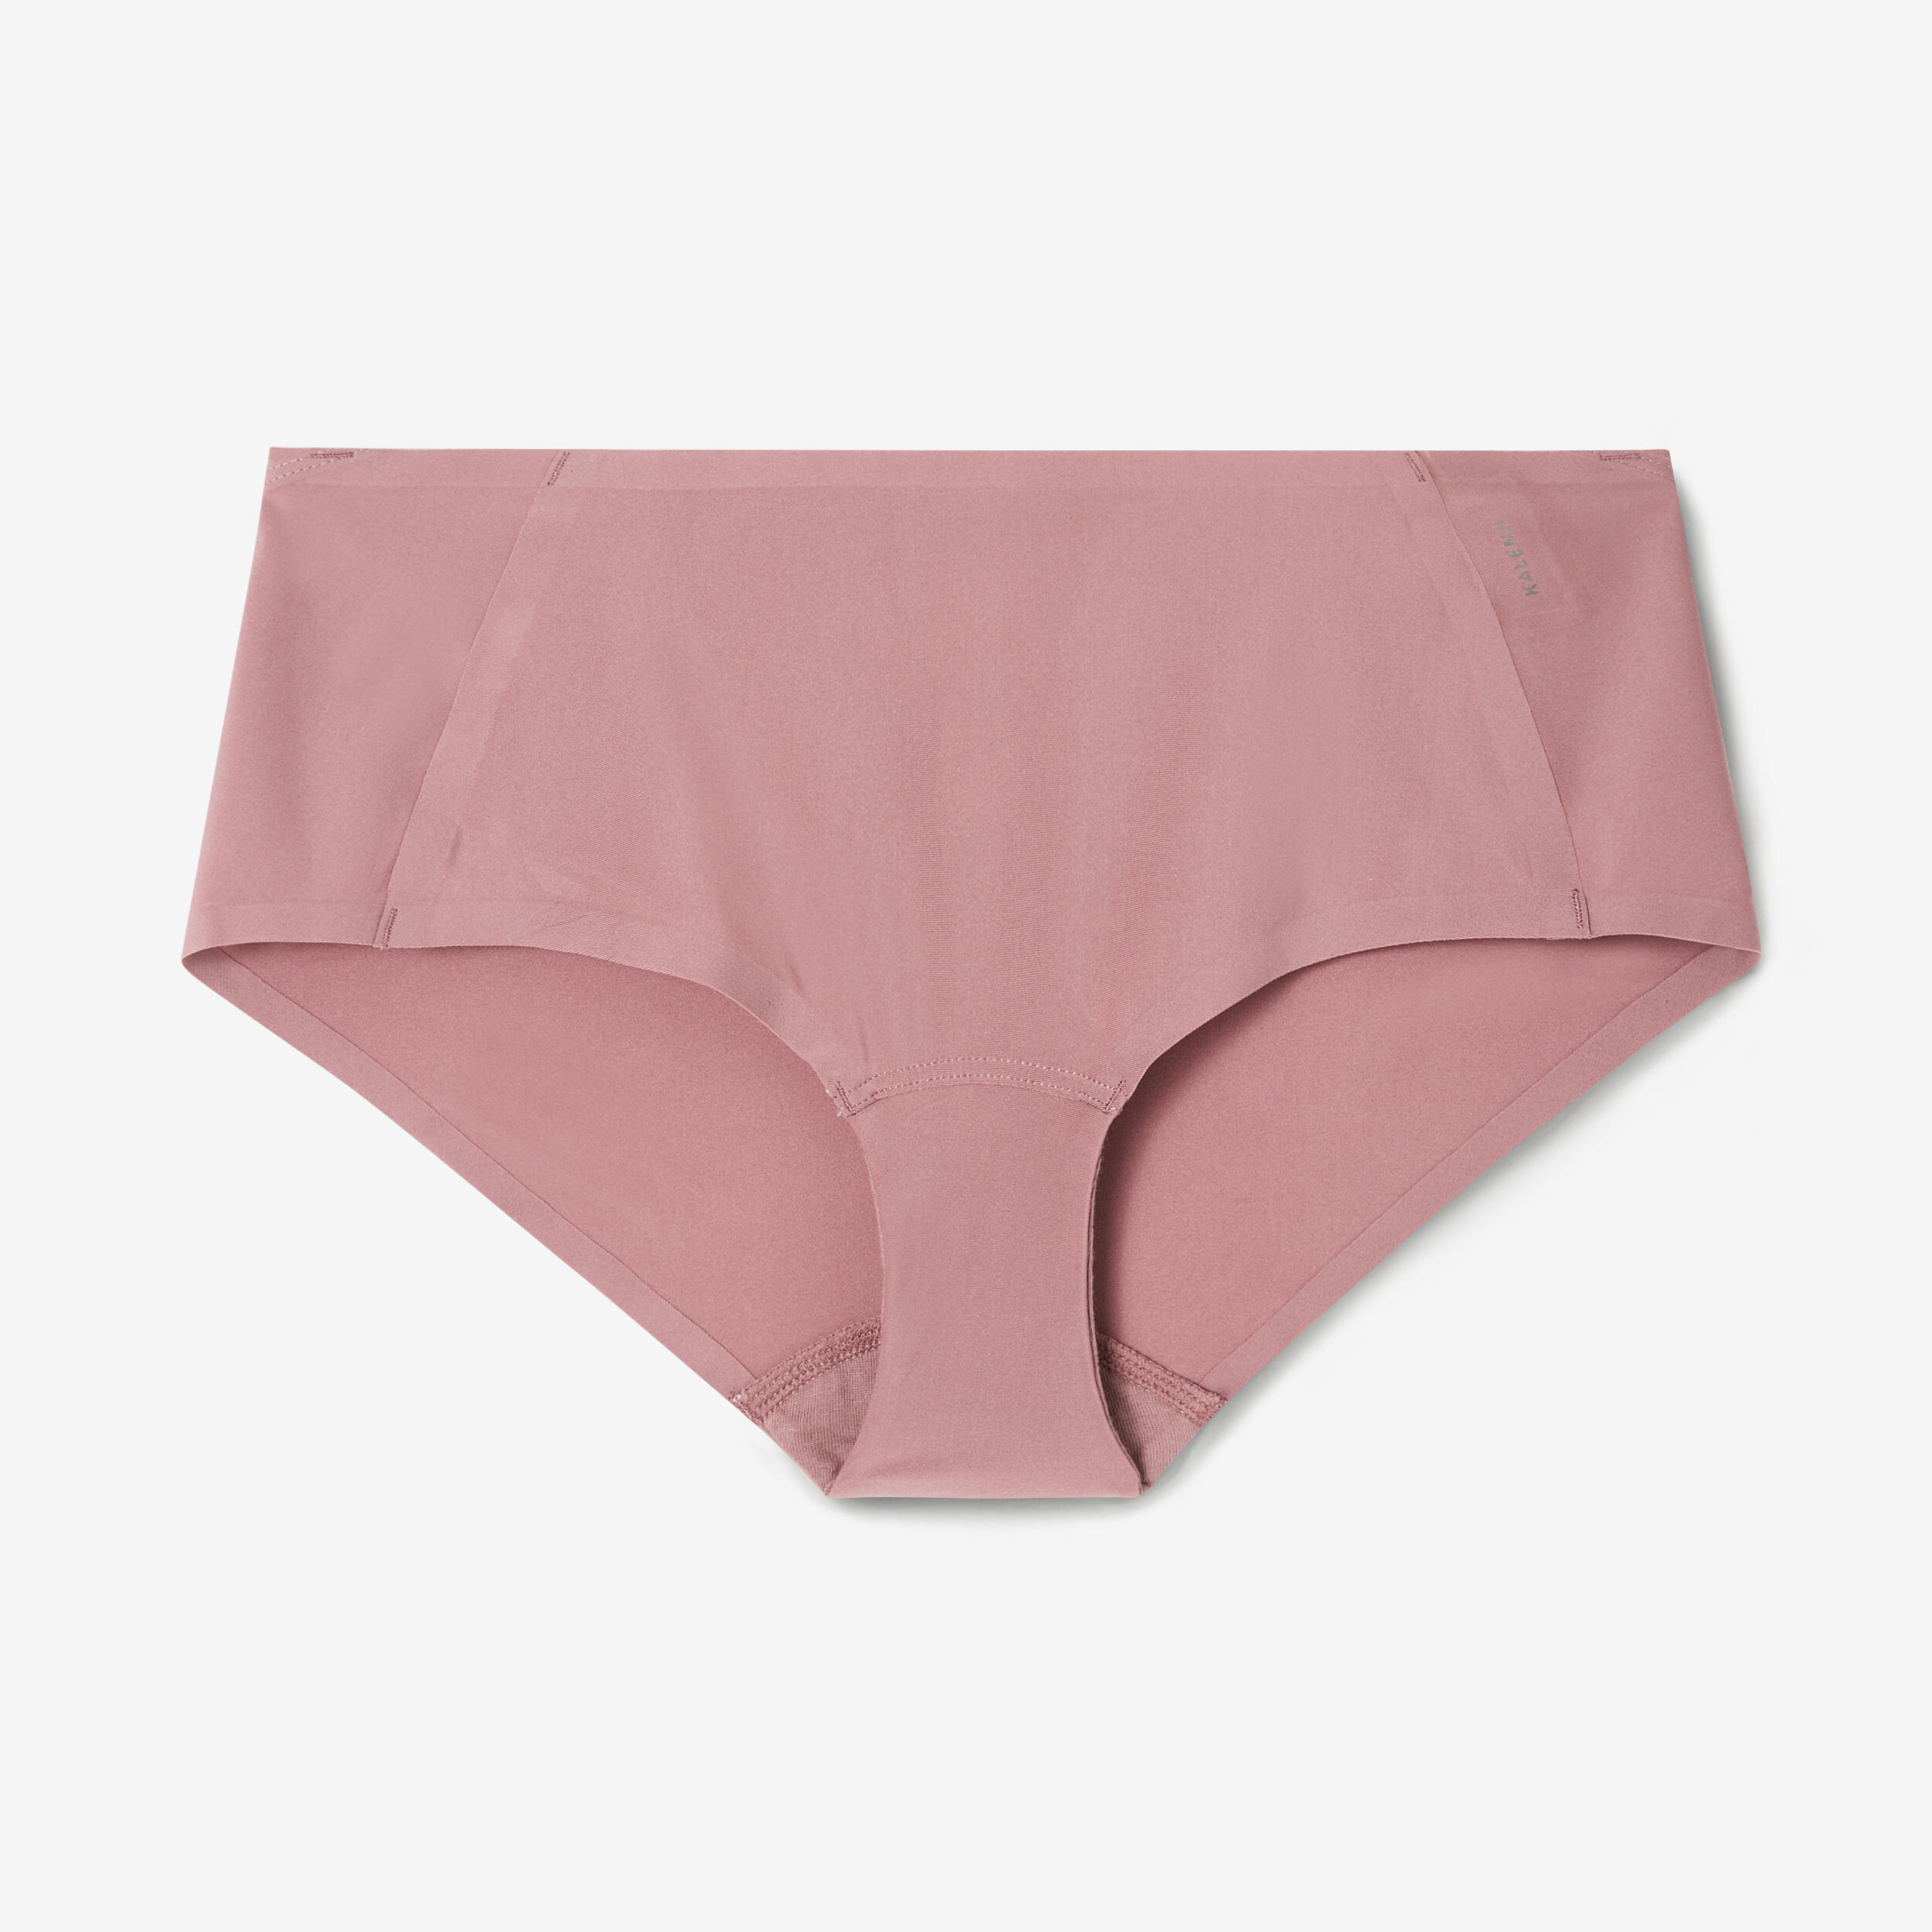 Women's Second Skin Boxers - Pink taupe 5/6